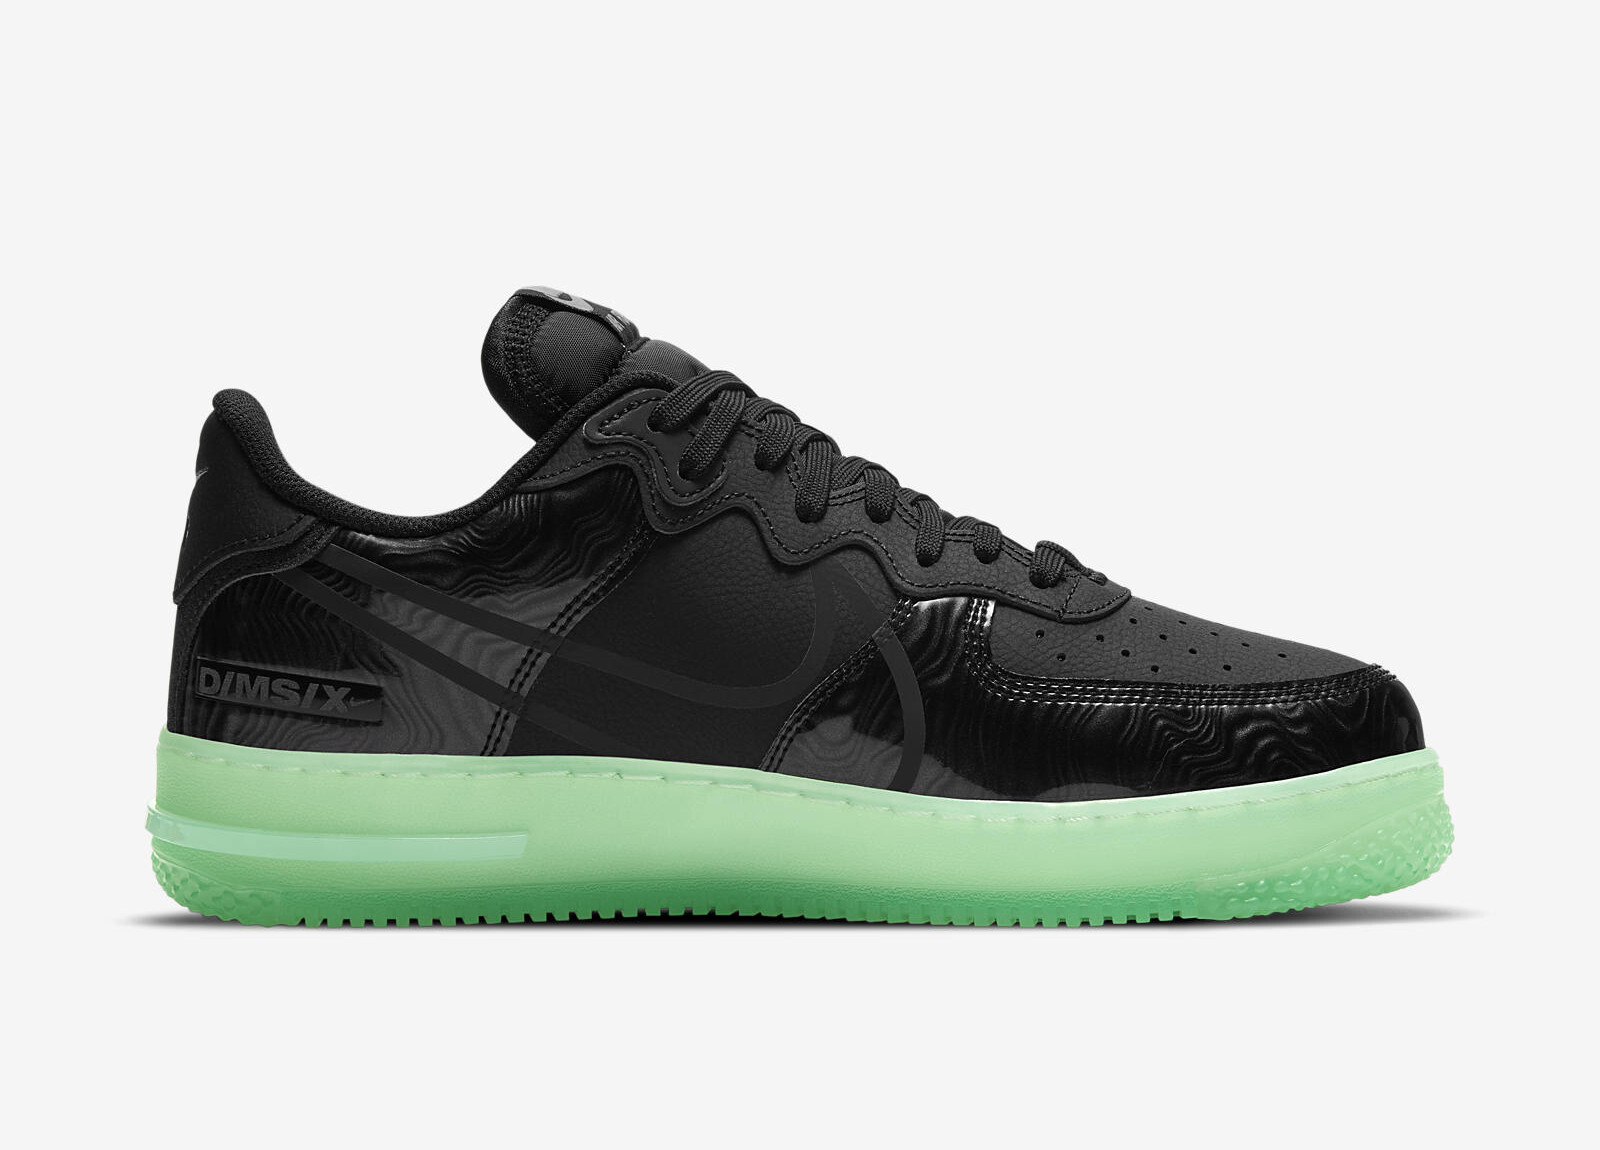 Nike Air Force 1 React LV8
Black / Barely Green